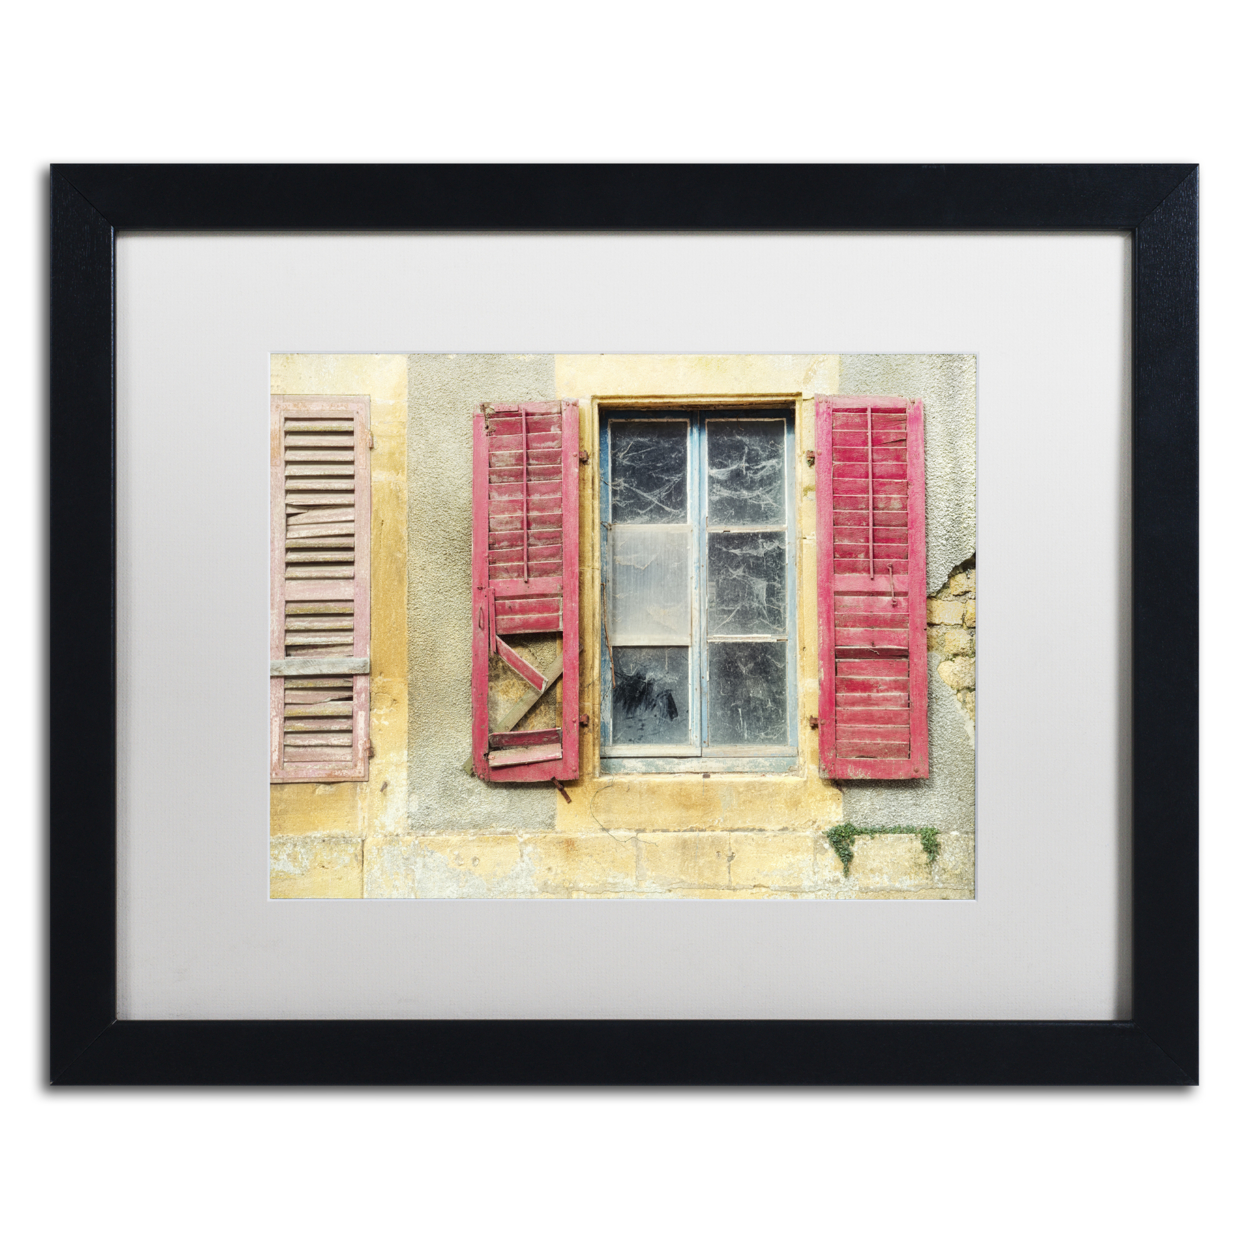 Cora Niele 'Red Shutters' Black Wooden Framed Art 18 X 22 Inches